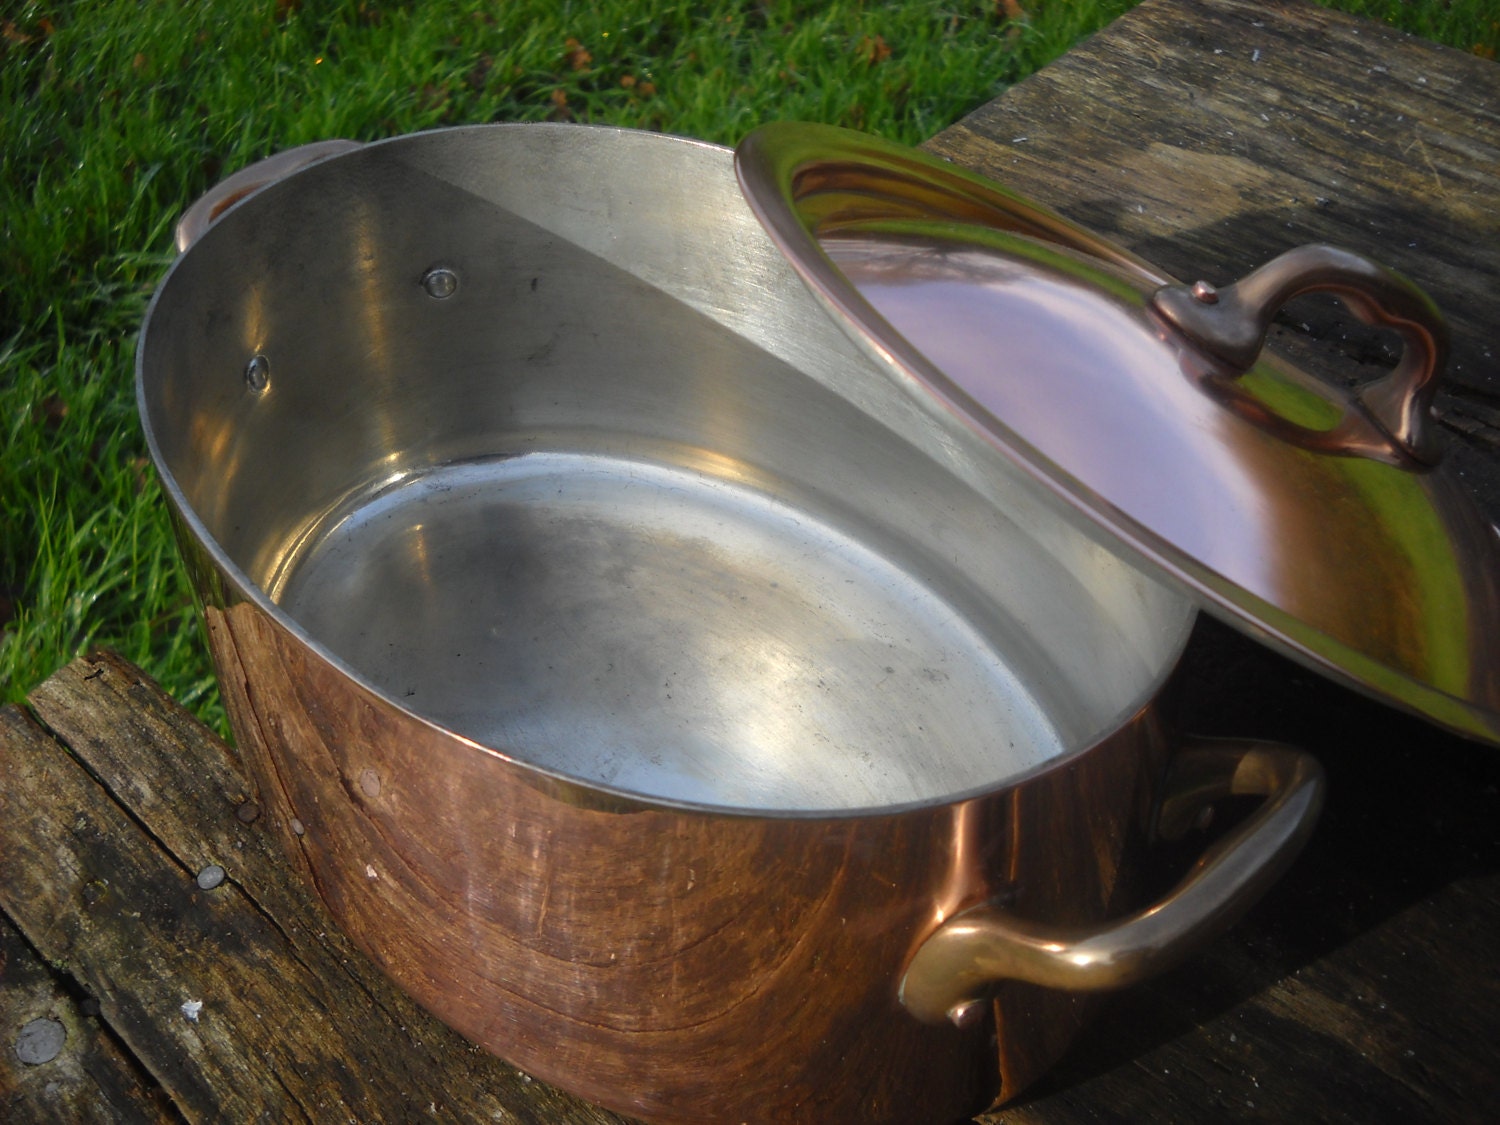 All refurbished solid copper Dutch oven, Casserole or Cocotte